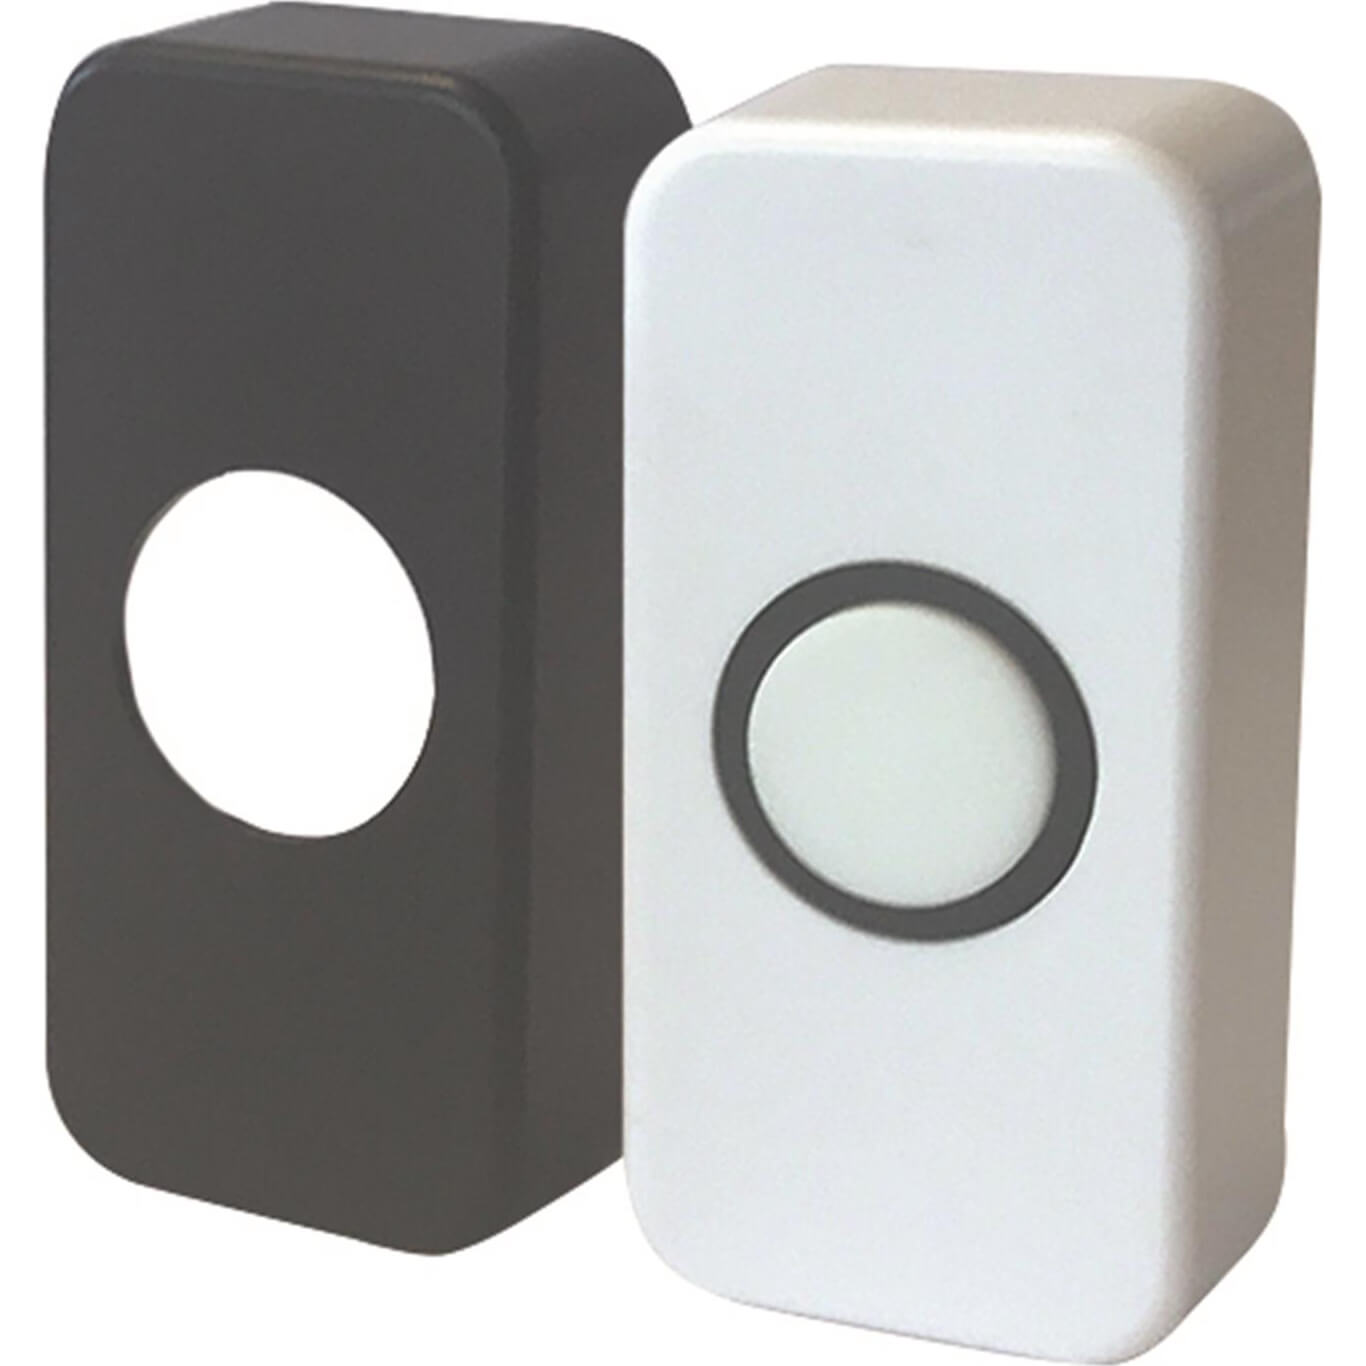 Deta Vimark Door Bell Push and Black or White Covers for Wired Chimes